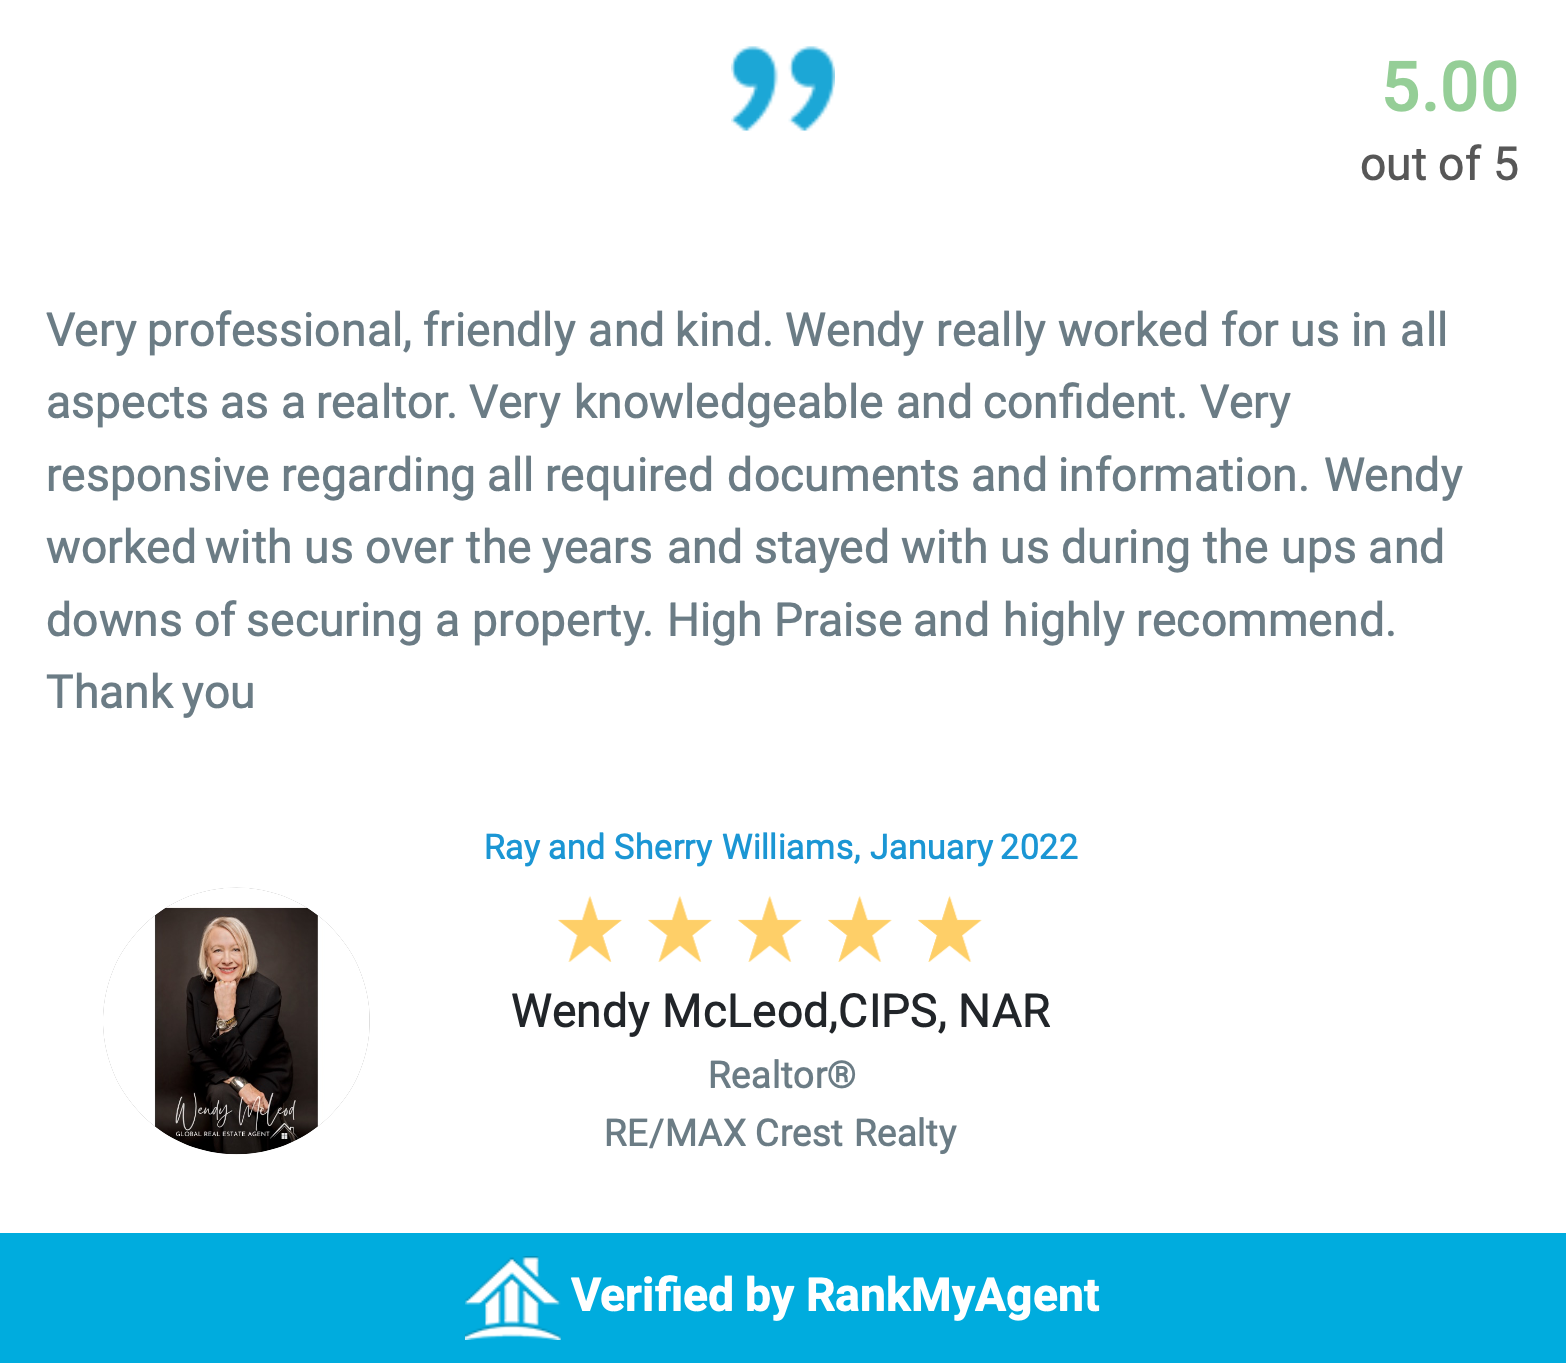 ANOTHER REVIEW OF WENDY MCLEOD